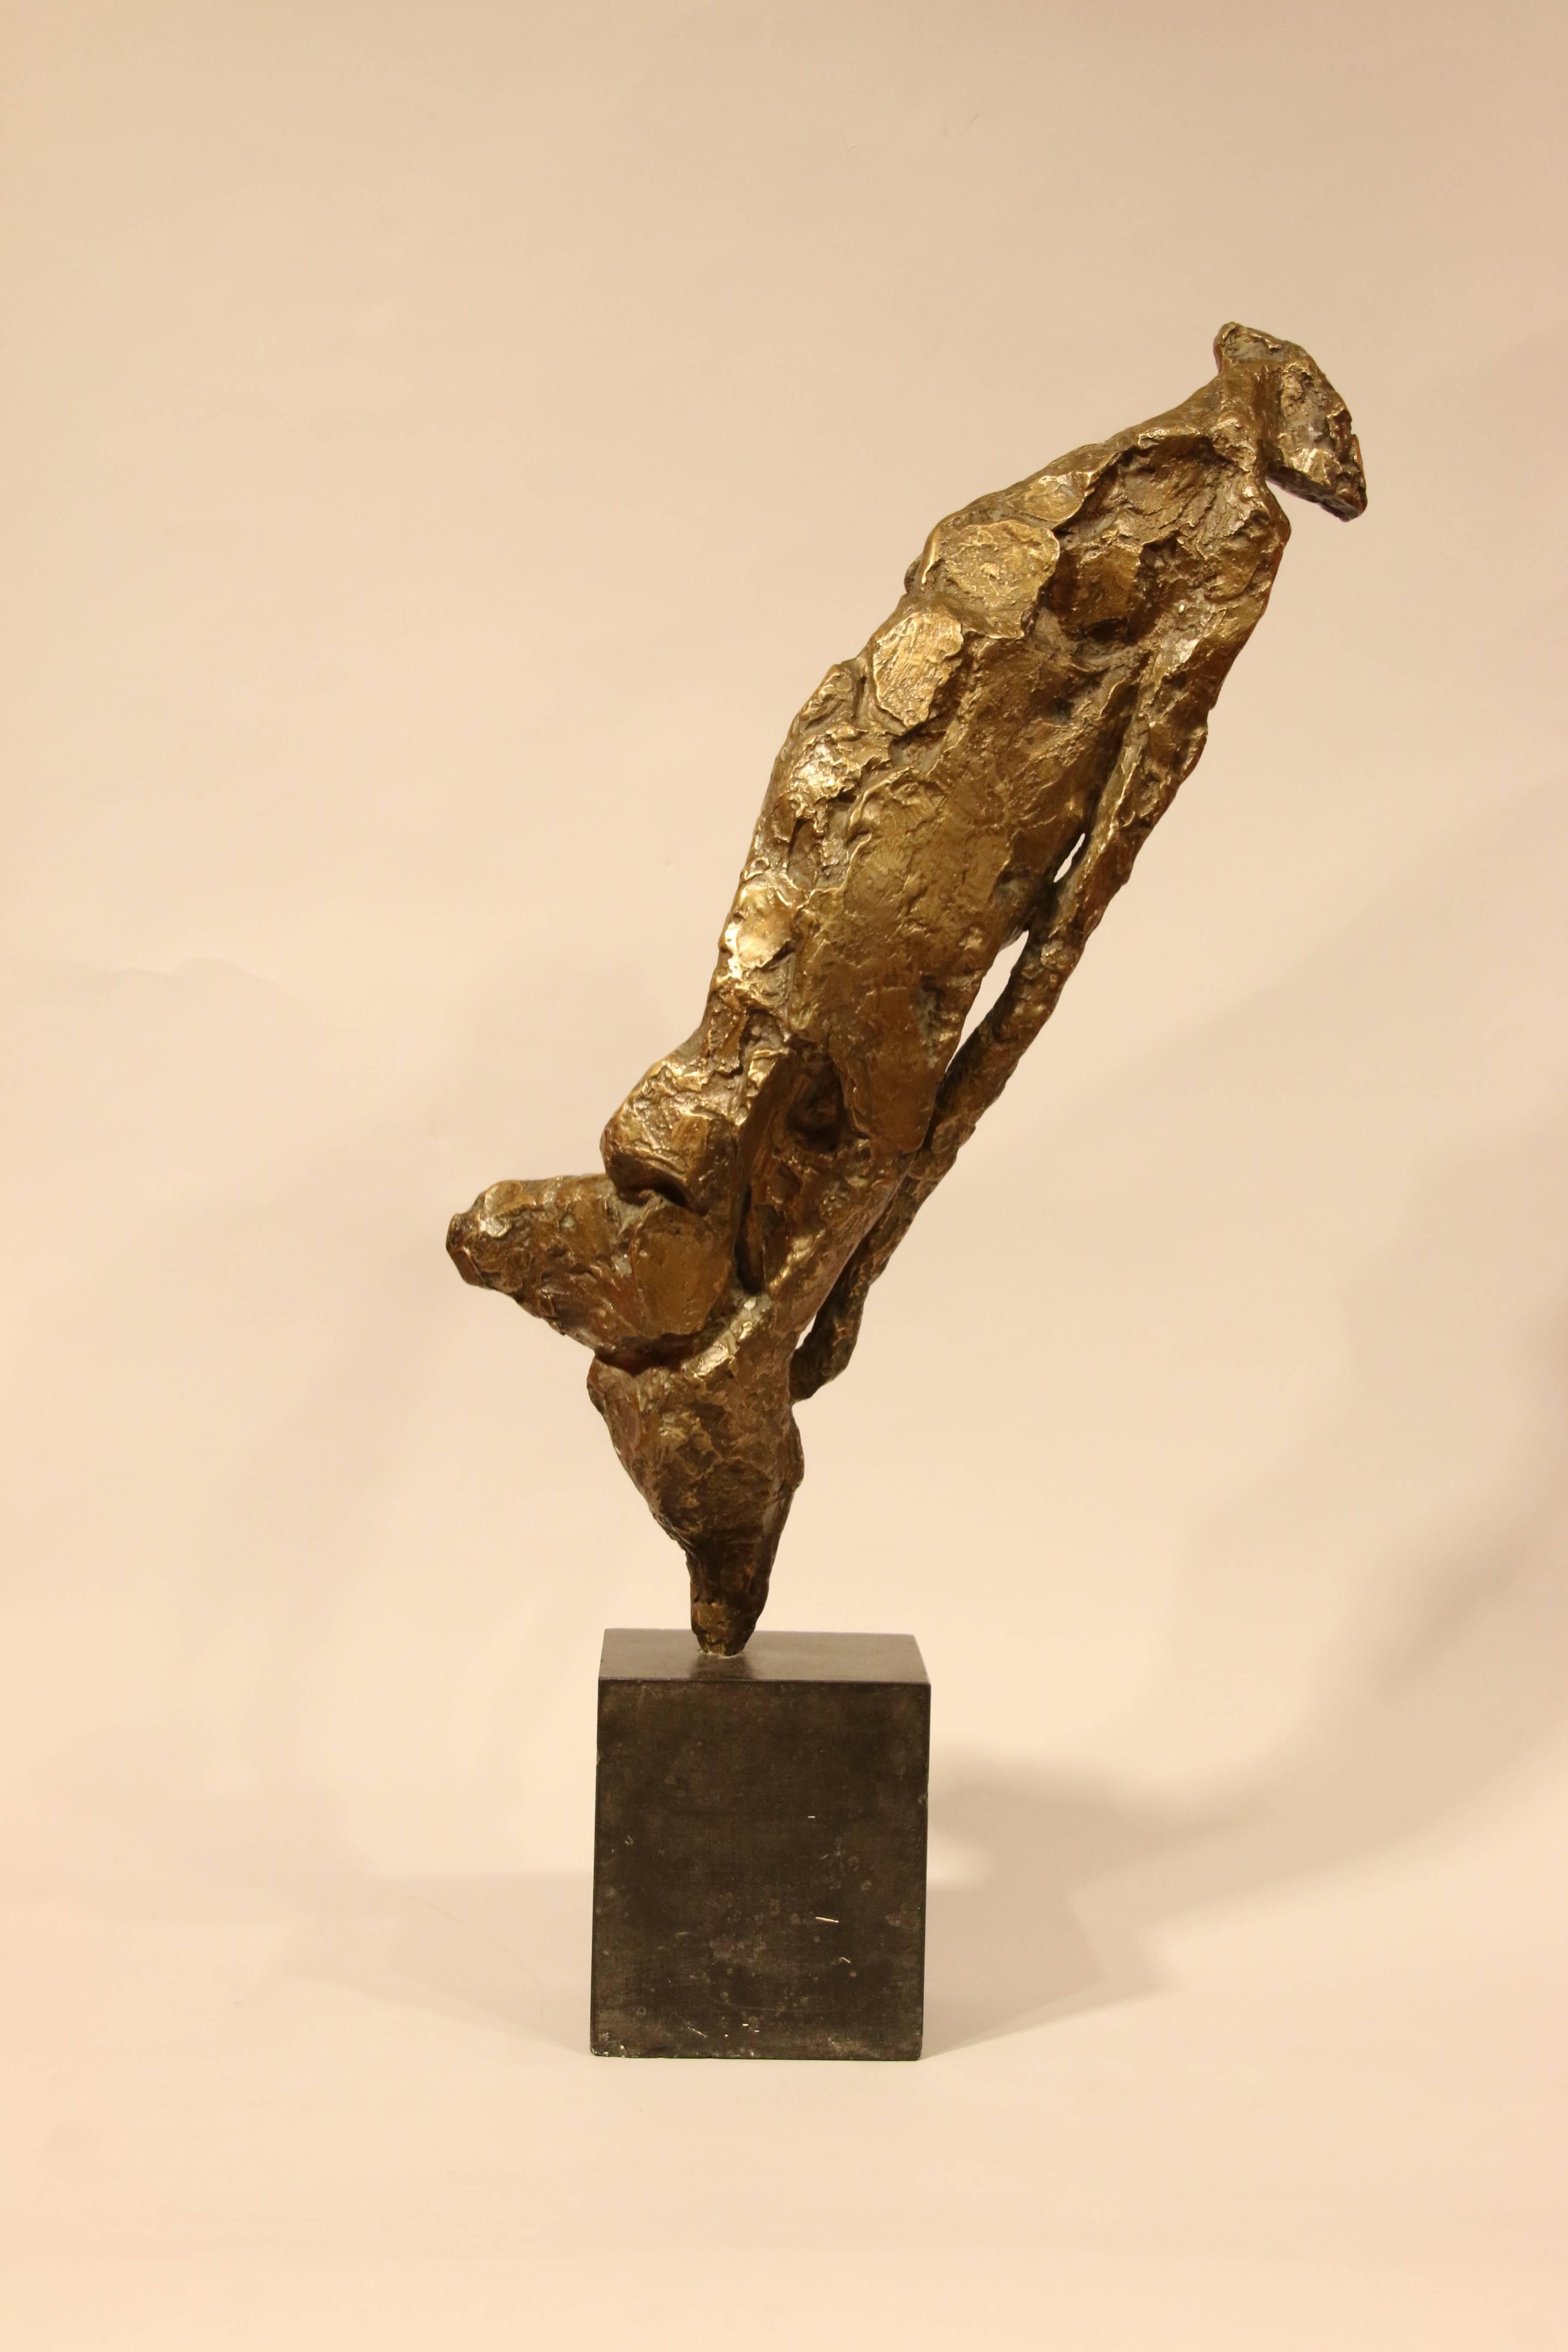 Bronze with honey-gold patination
Fixed on a slate base
Signed at the back 